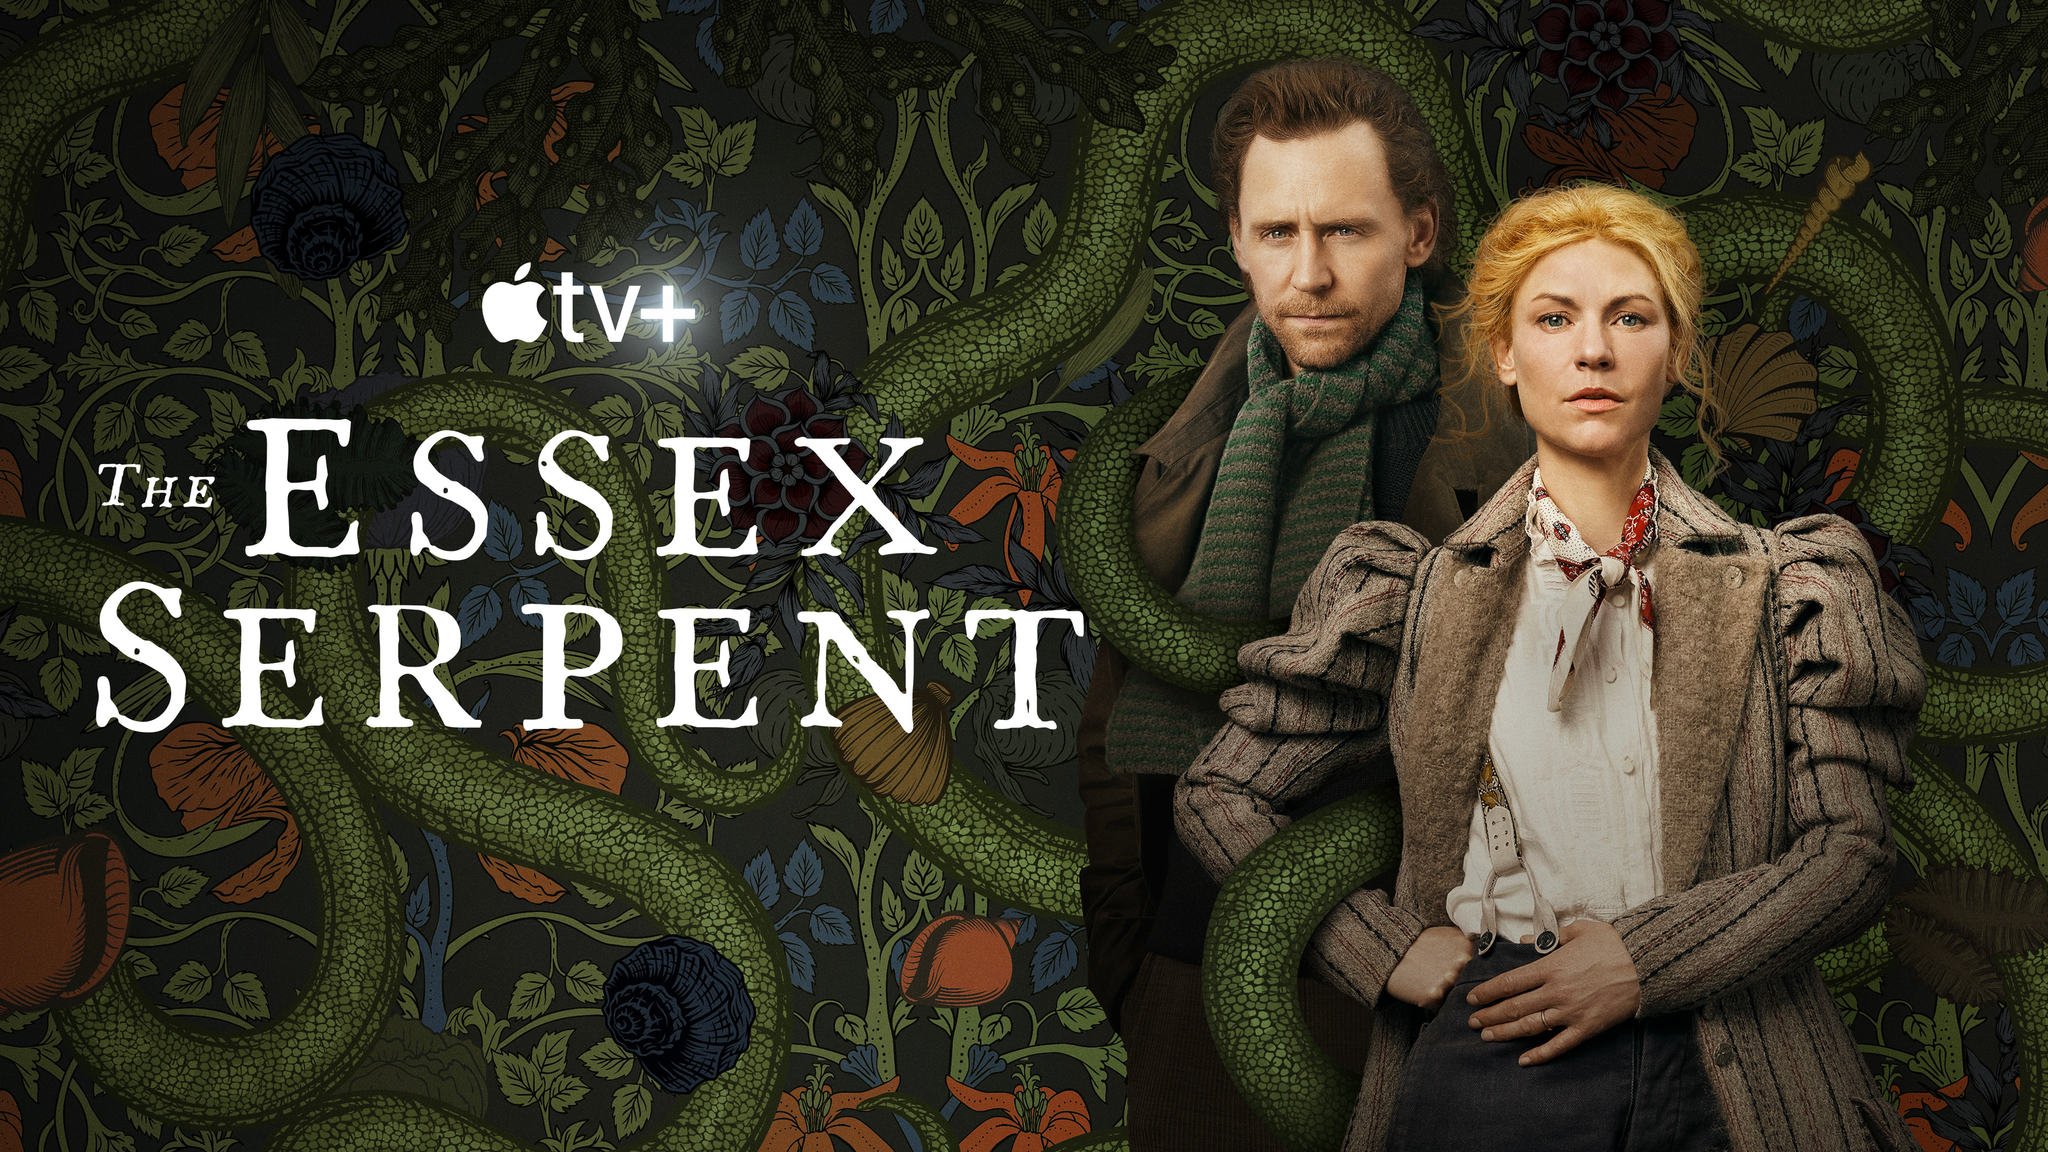 'Severance' & 'The Essex Serpent' two of last week's most-popular shows